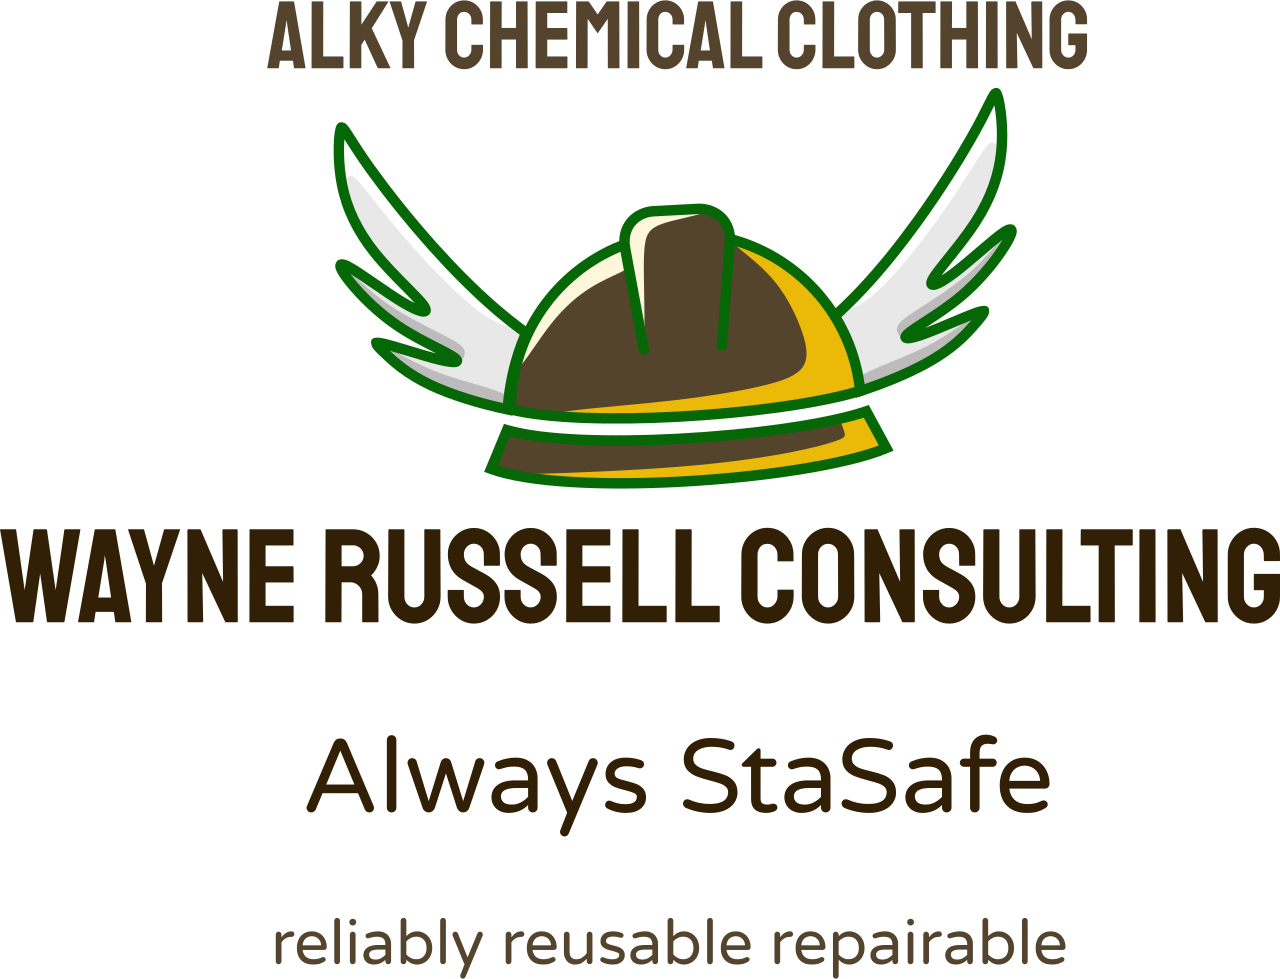 Wayne Russell Consulting's logo